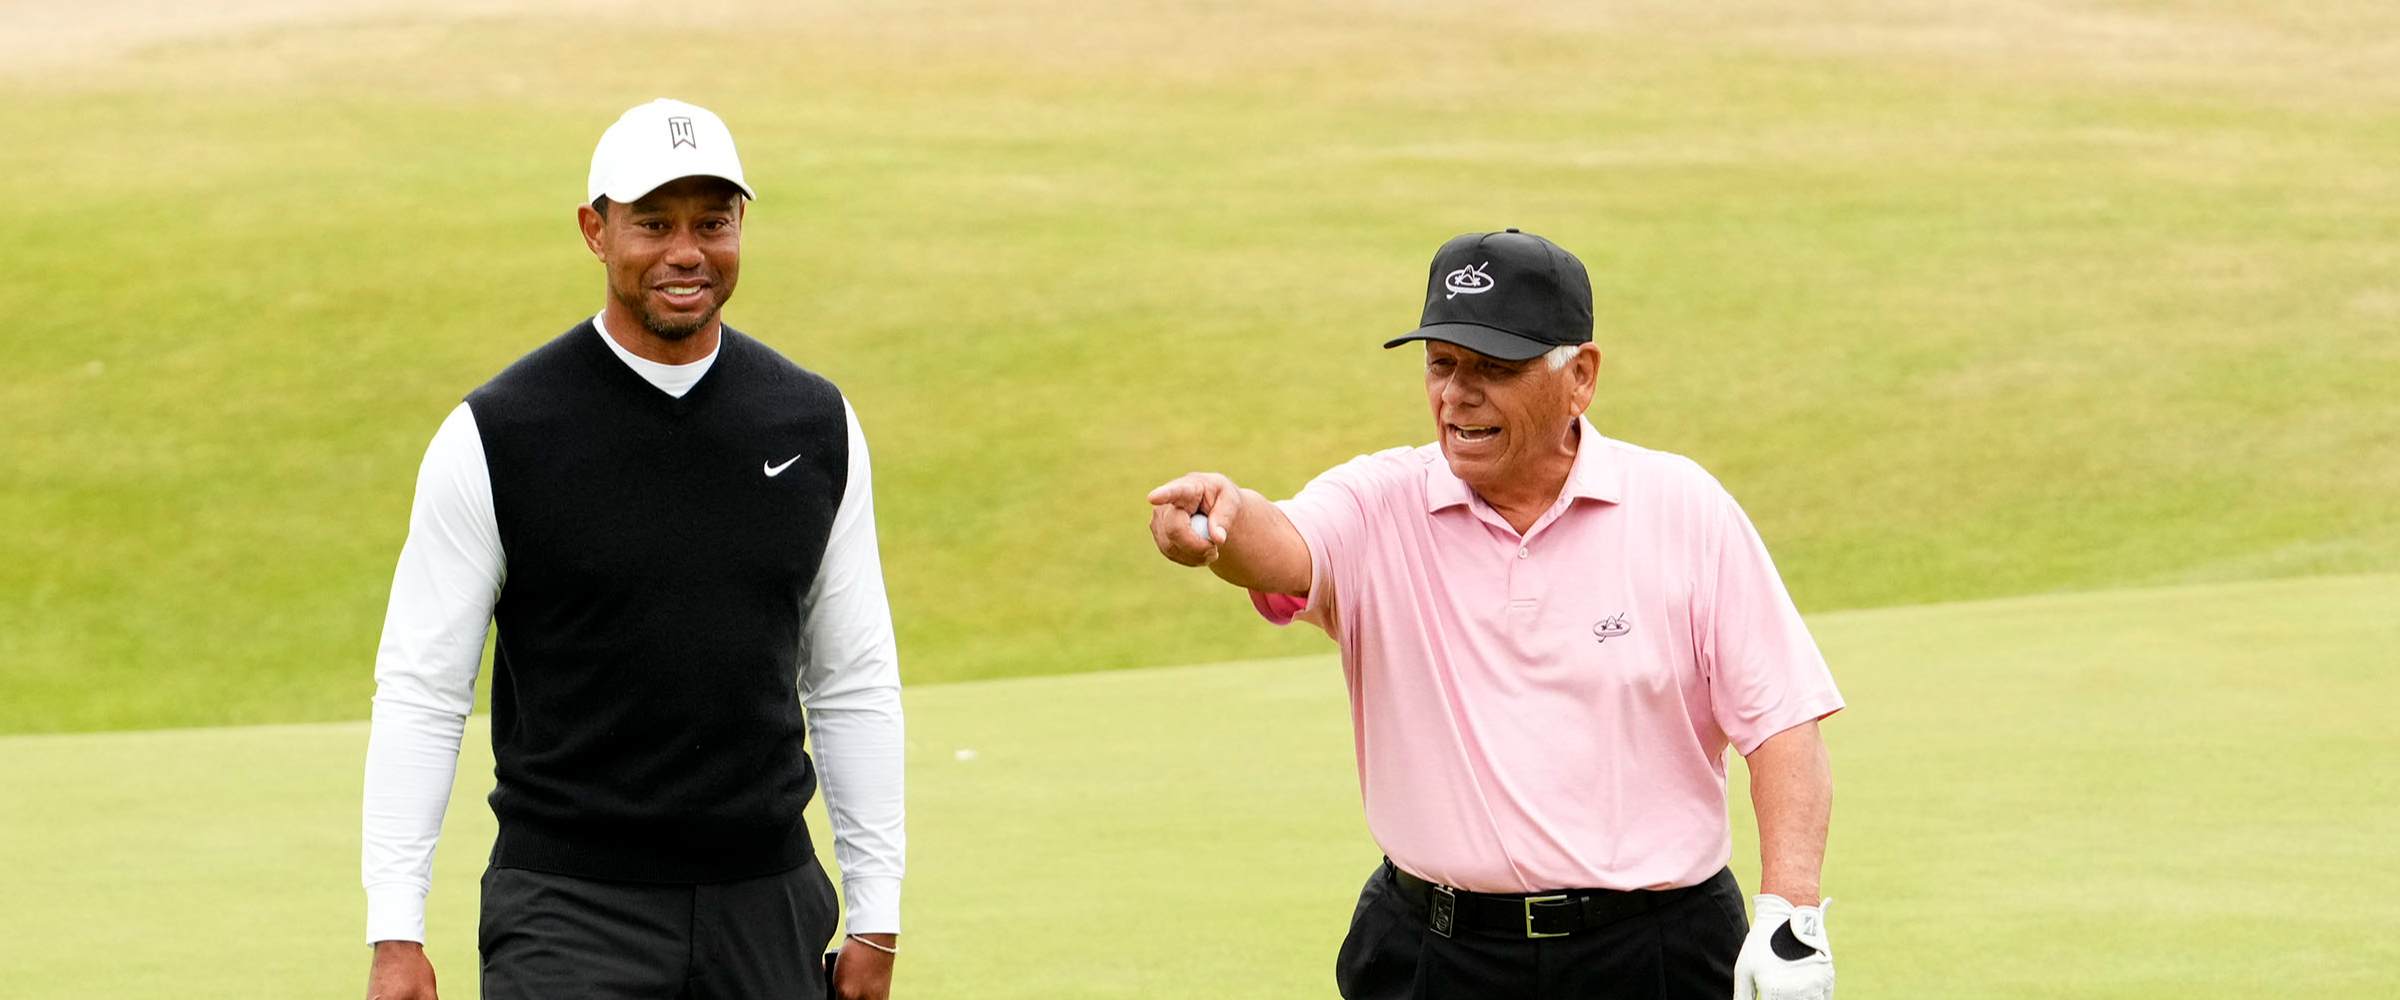 How much longer can Tiger Woods compete on the PGA Tour?